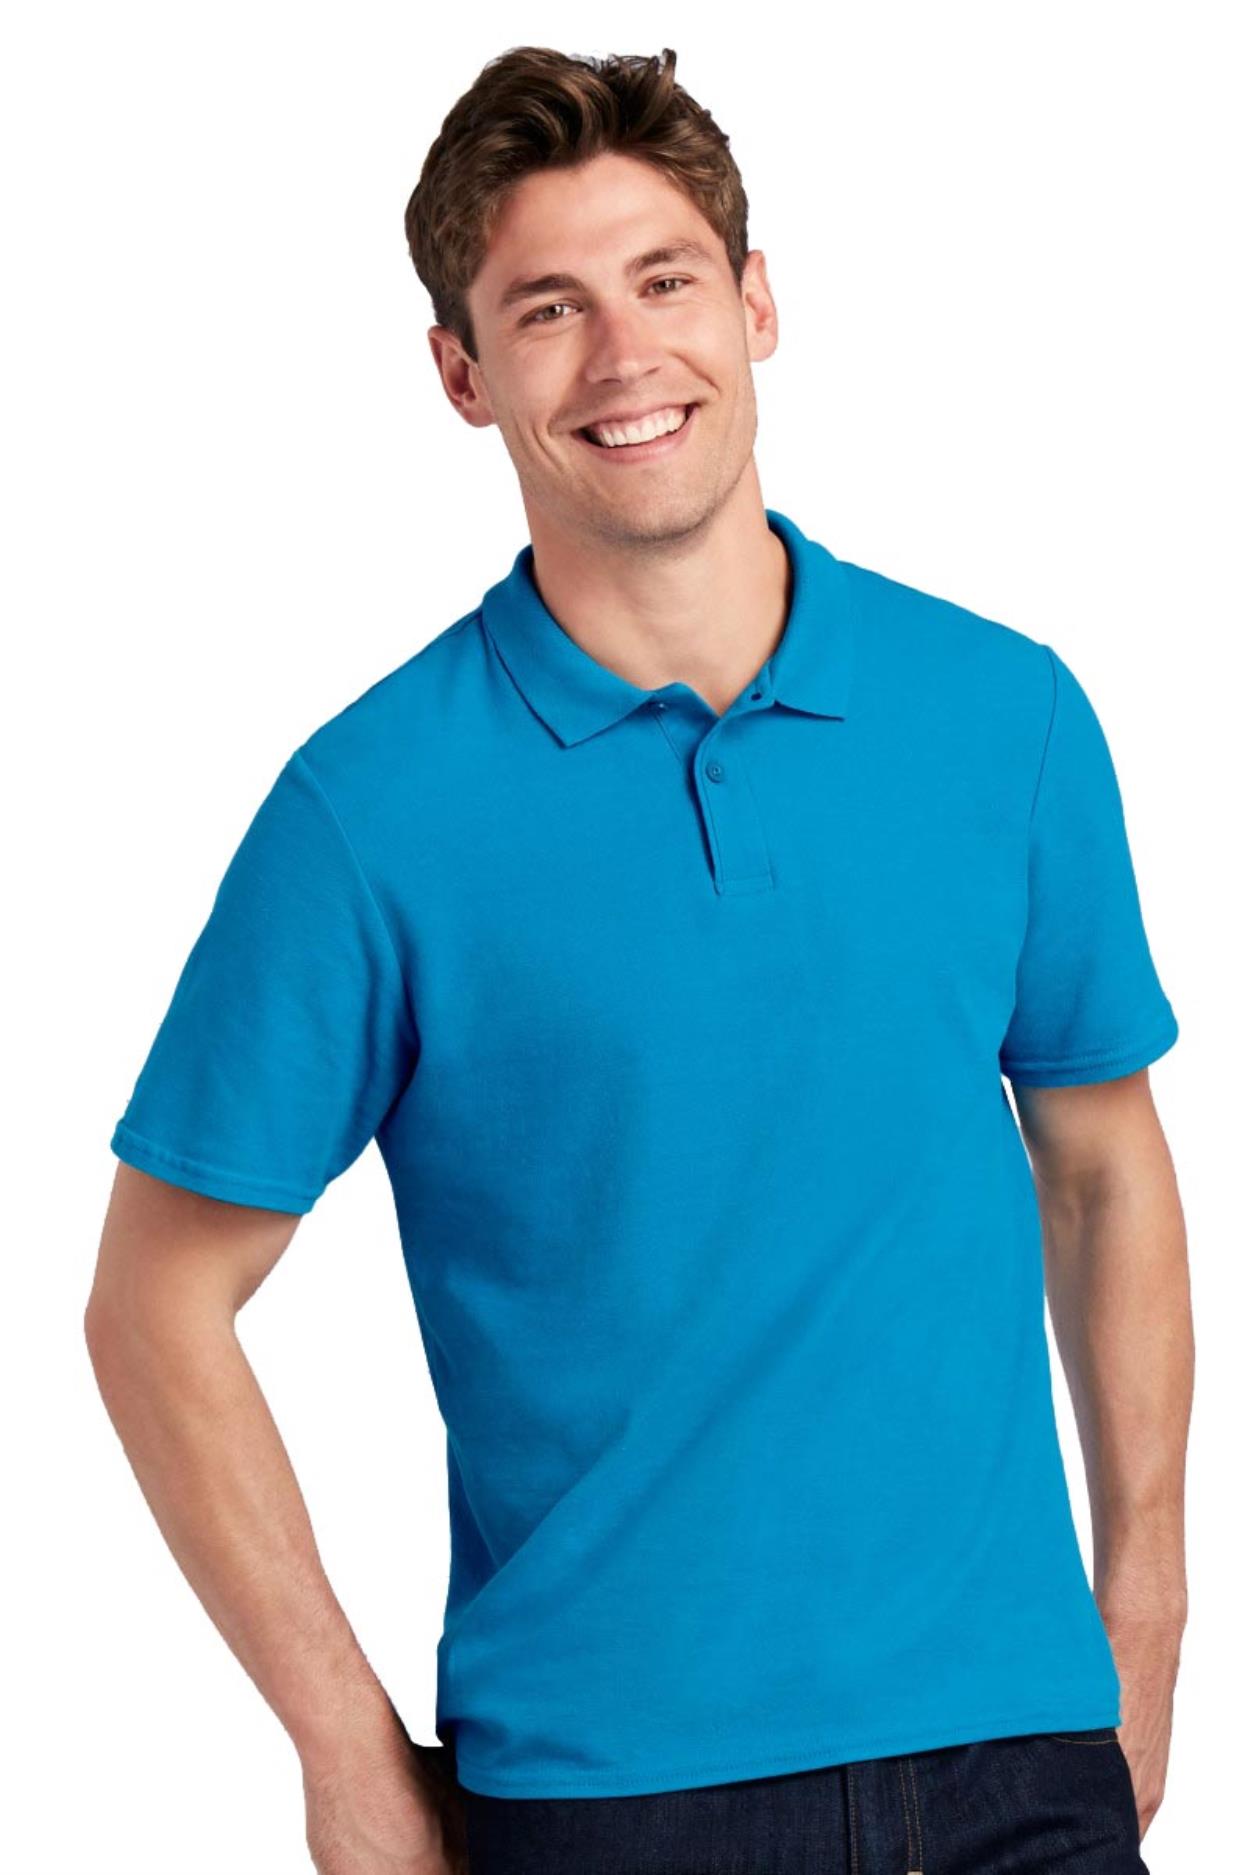 GD35 64800 Softstyle Adult Double Pique Polo Shirt main image